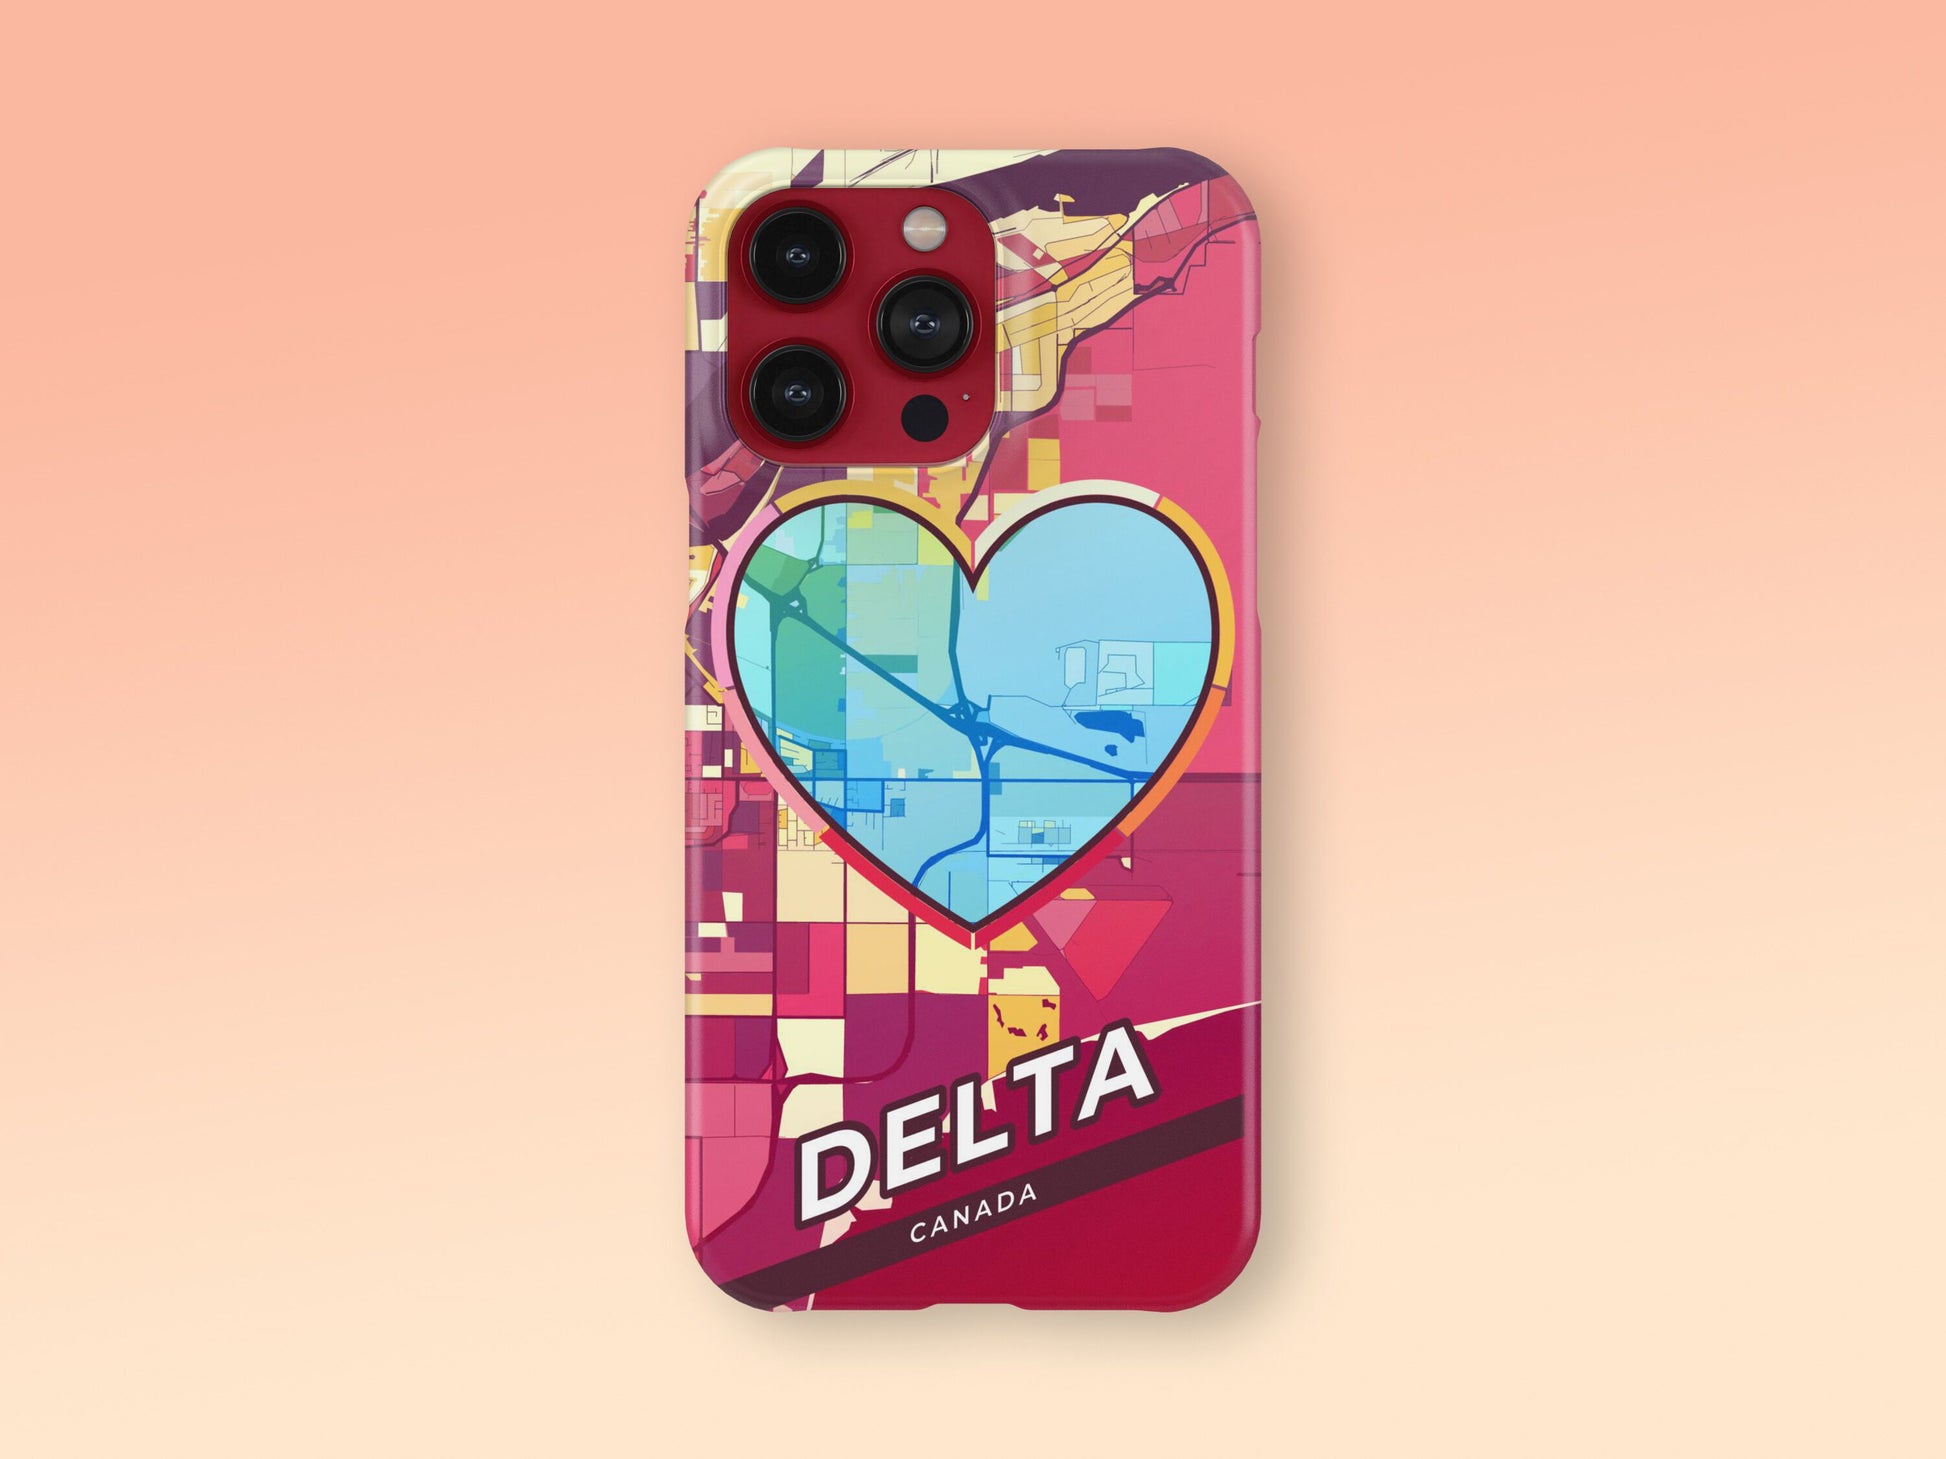 Delta Canada slim phone case with colorful icon. Birthday, wedding or housewarming gift. Couple match cases. 2